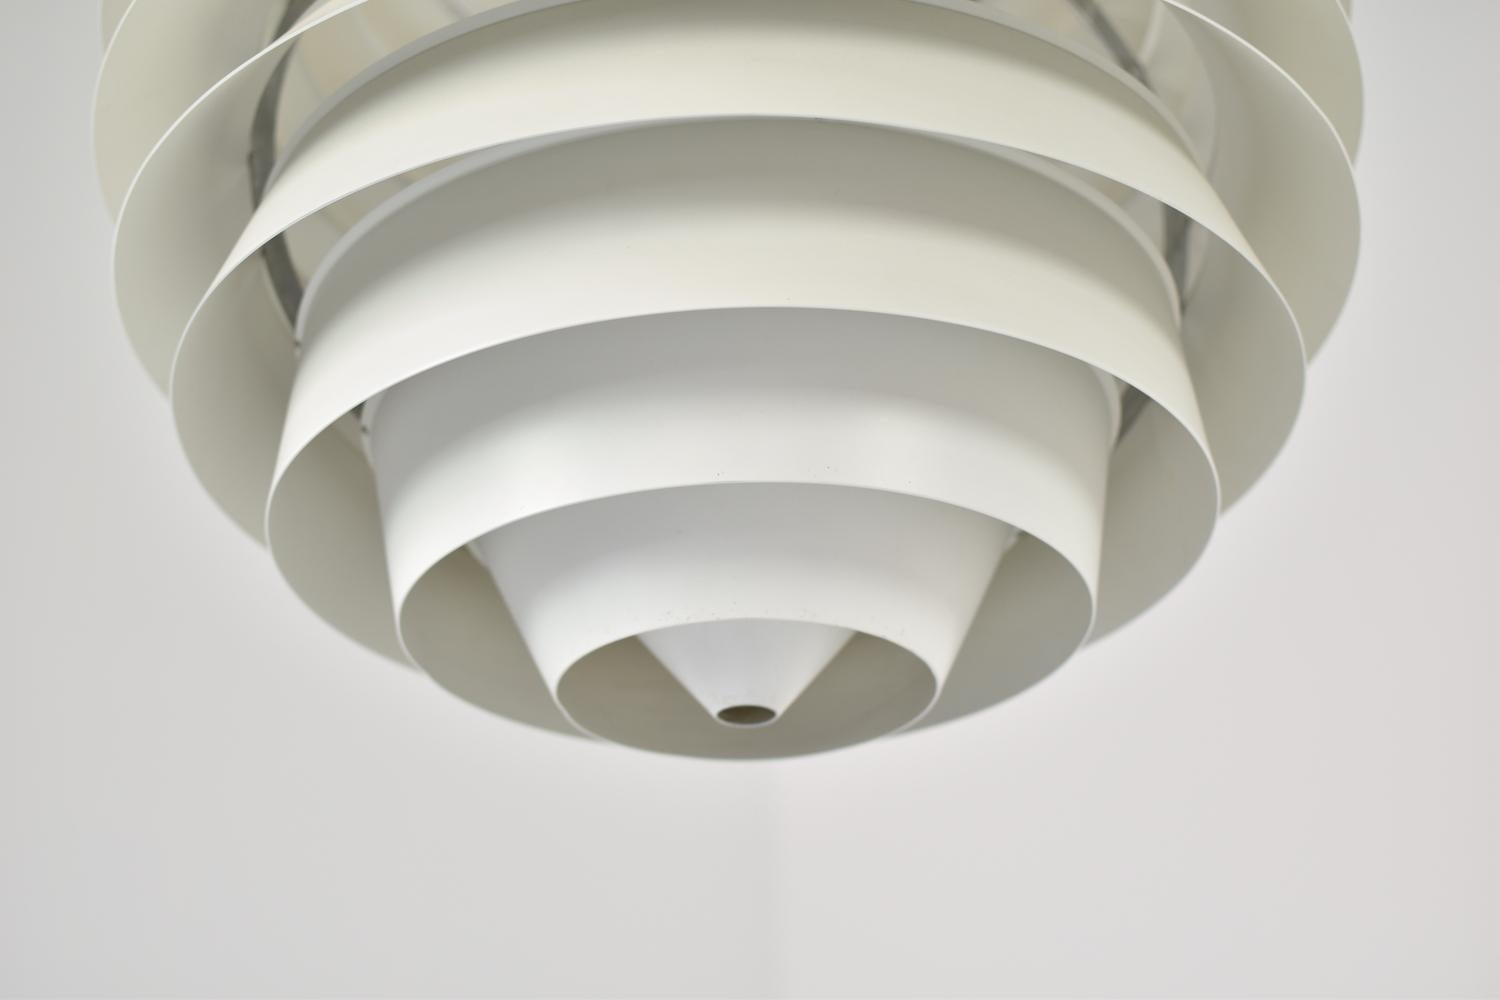 Stunning ‘Louvre’ pendant designed by Poul Henningsen for Louis Poulsen, Denmark, 1957. Originally designed for the Adventist Church in Skodsborg. Created from 13 matte white lacquered shades that provide a uniform light spreading. Beautiful